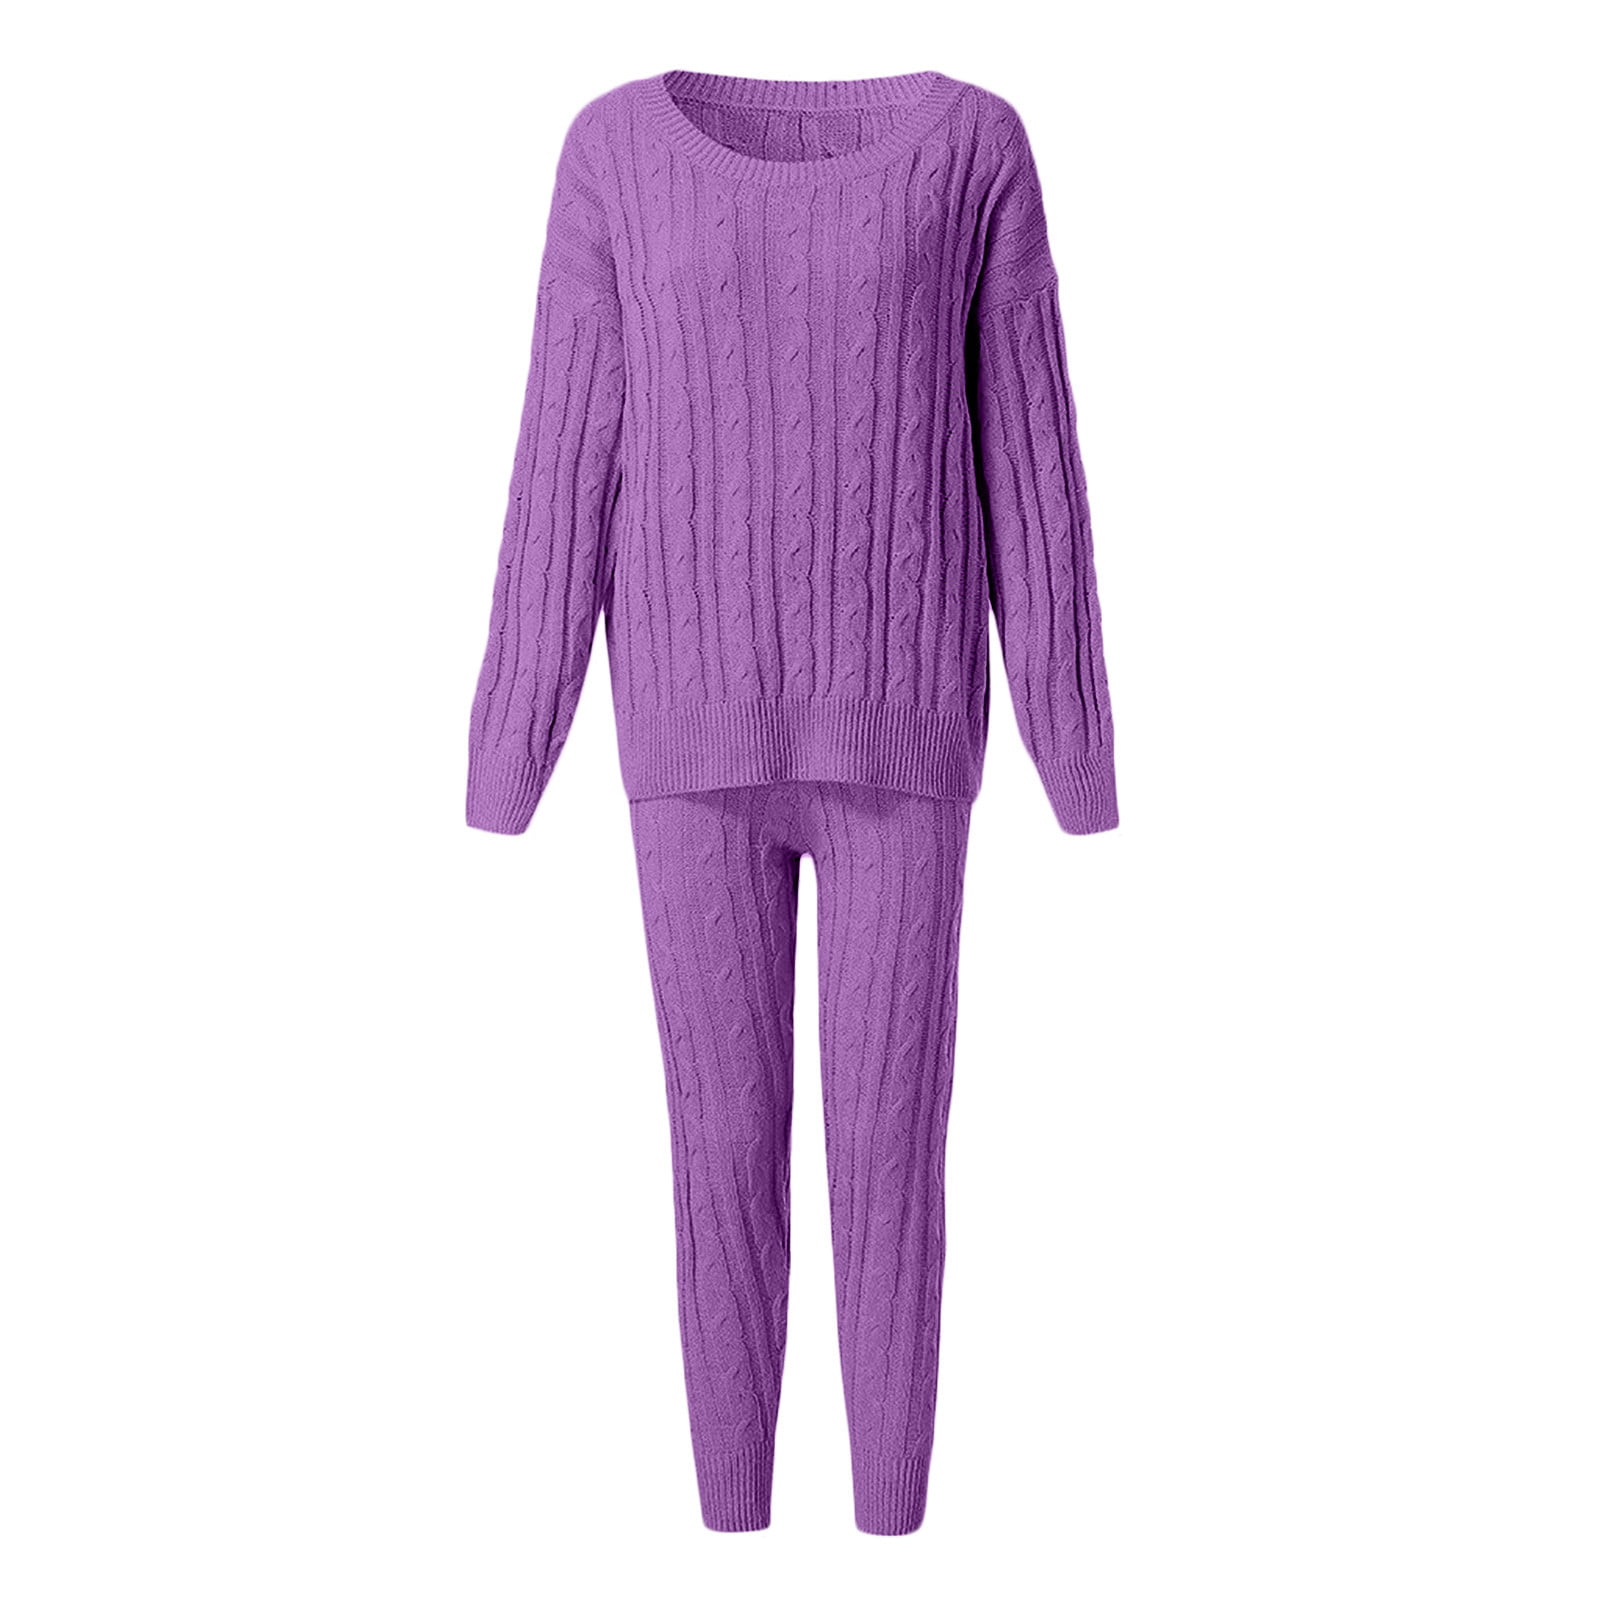 UTTOASFAY Plus Size Women Pants Pants Solid Sleeve Clearance Womens Knitted Two-Piece Long Sweater Cable Long Suit Shoulder 18(Xxxxxl) Purple Color Picks Warm off Flash Set